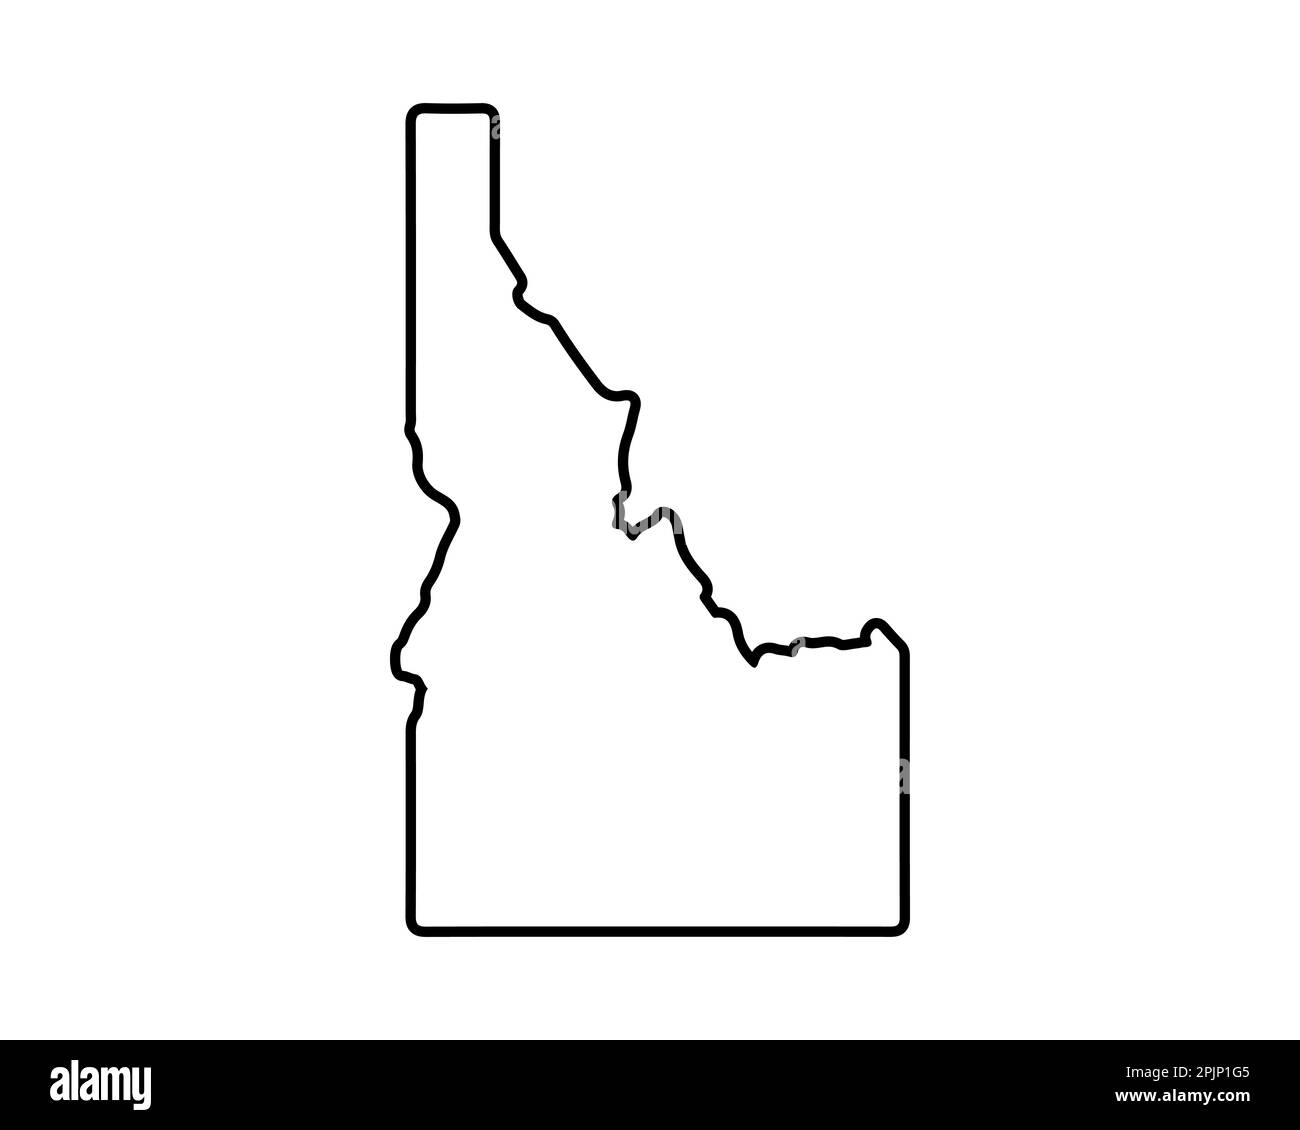 Idaho state map. US state map. Idaho silhouette symbol. Vector illustration Stock Vector